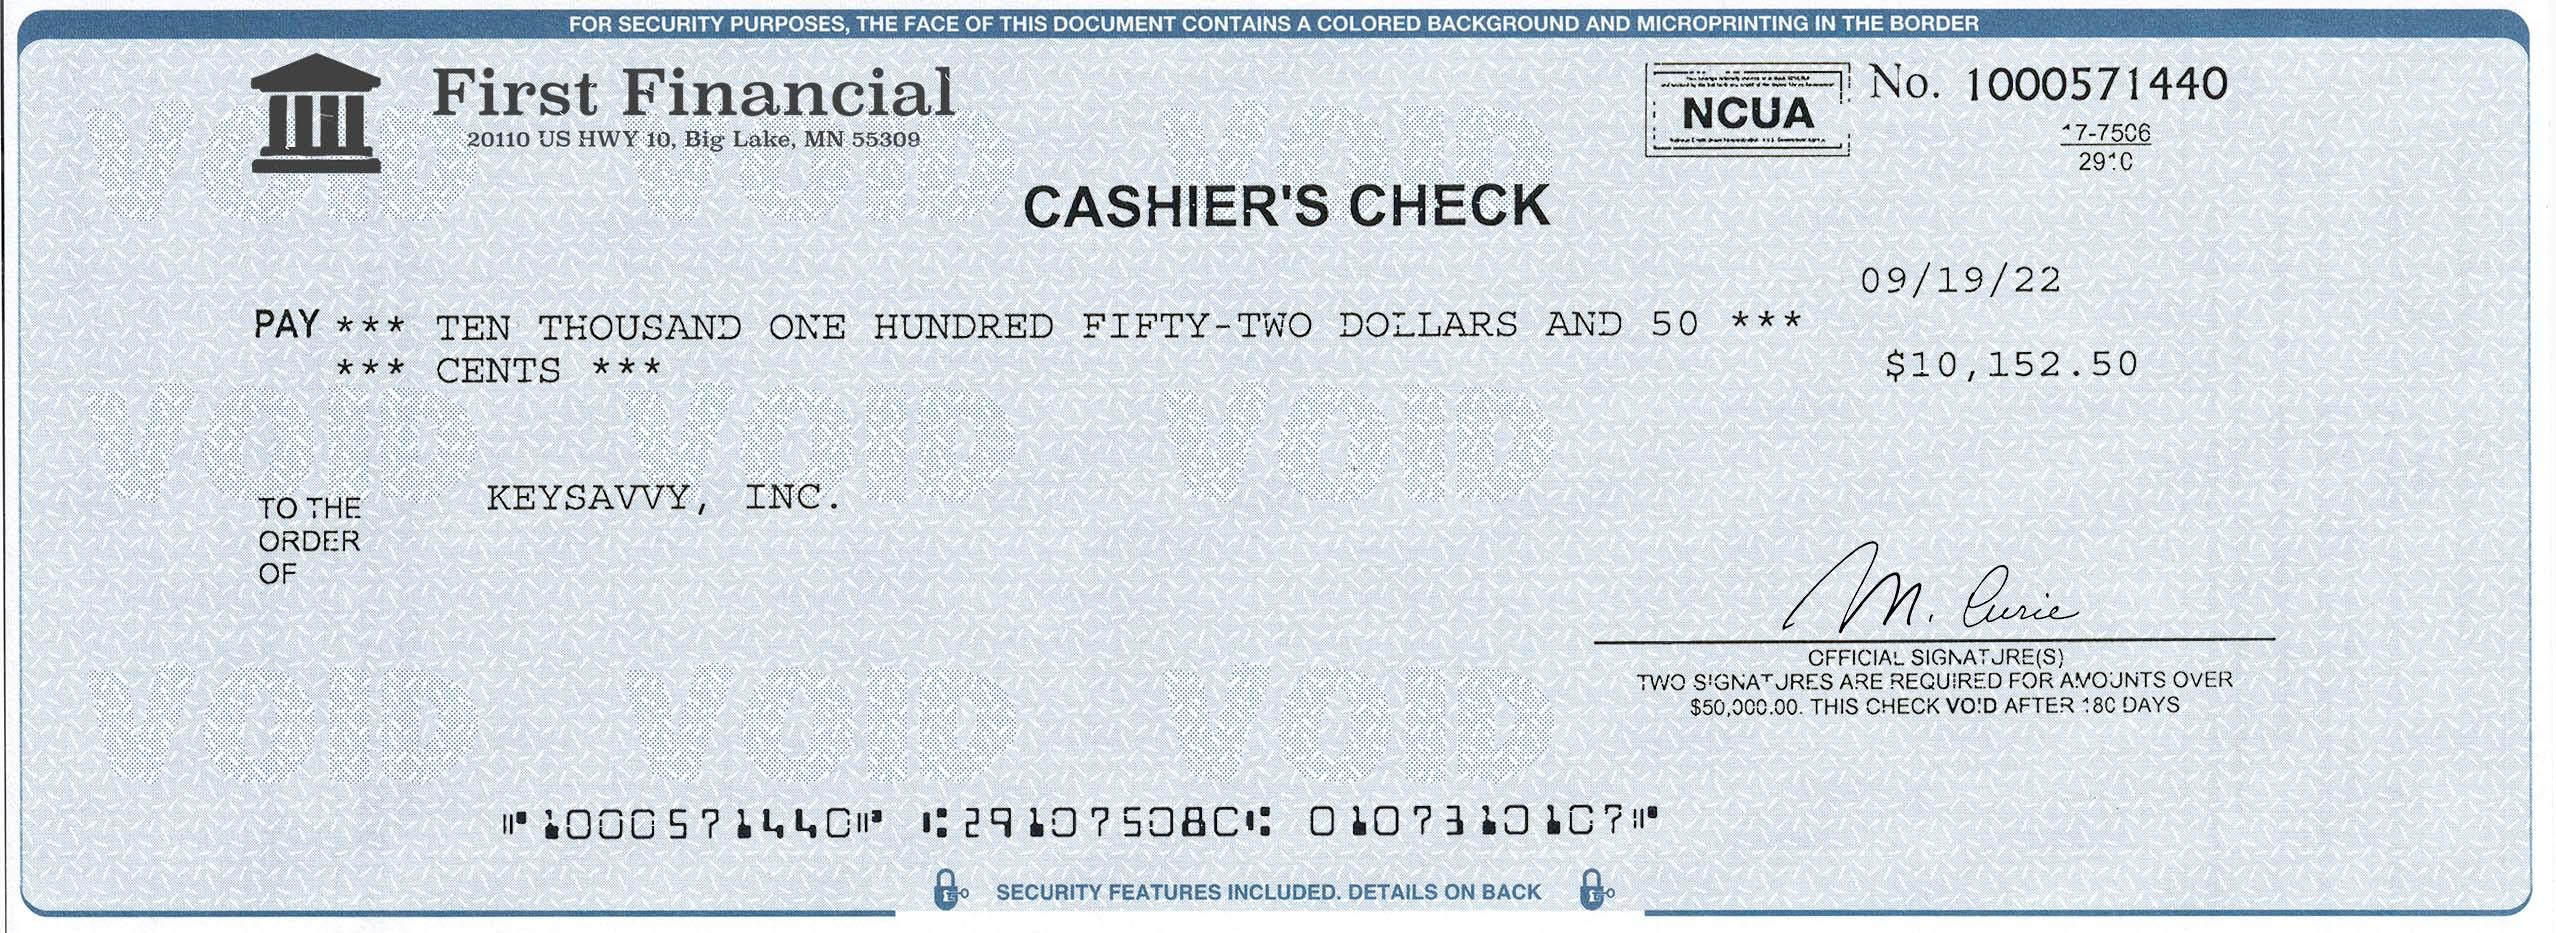 Is this cashier's check fake or real?